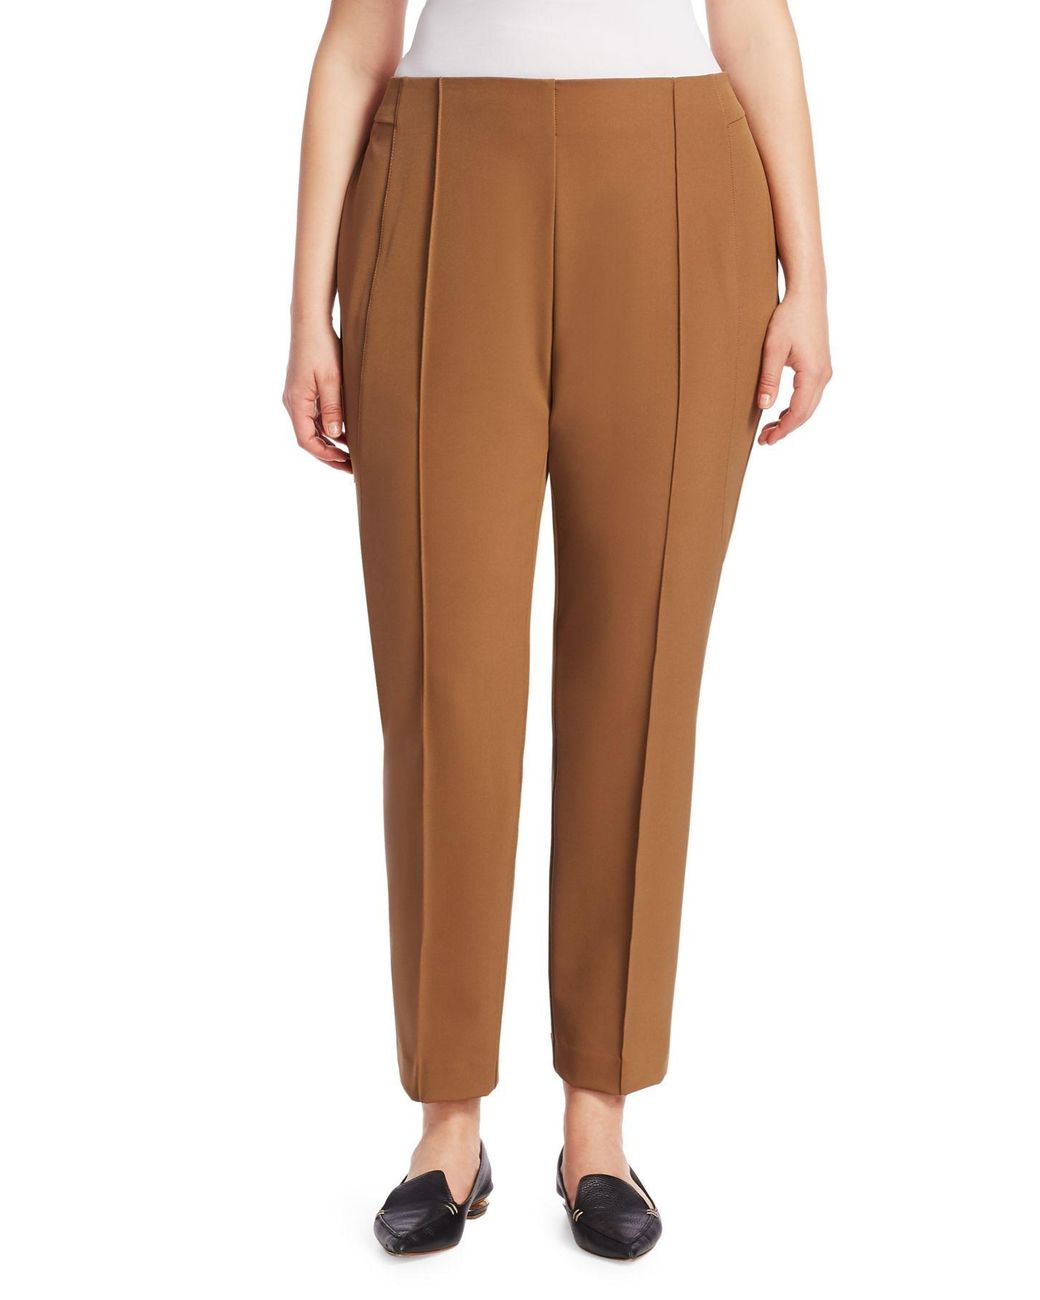 Lafayette 148 New York Synthetic Acclaimed Stretch Gramercy Pants in